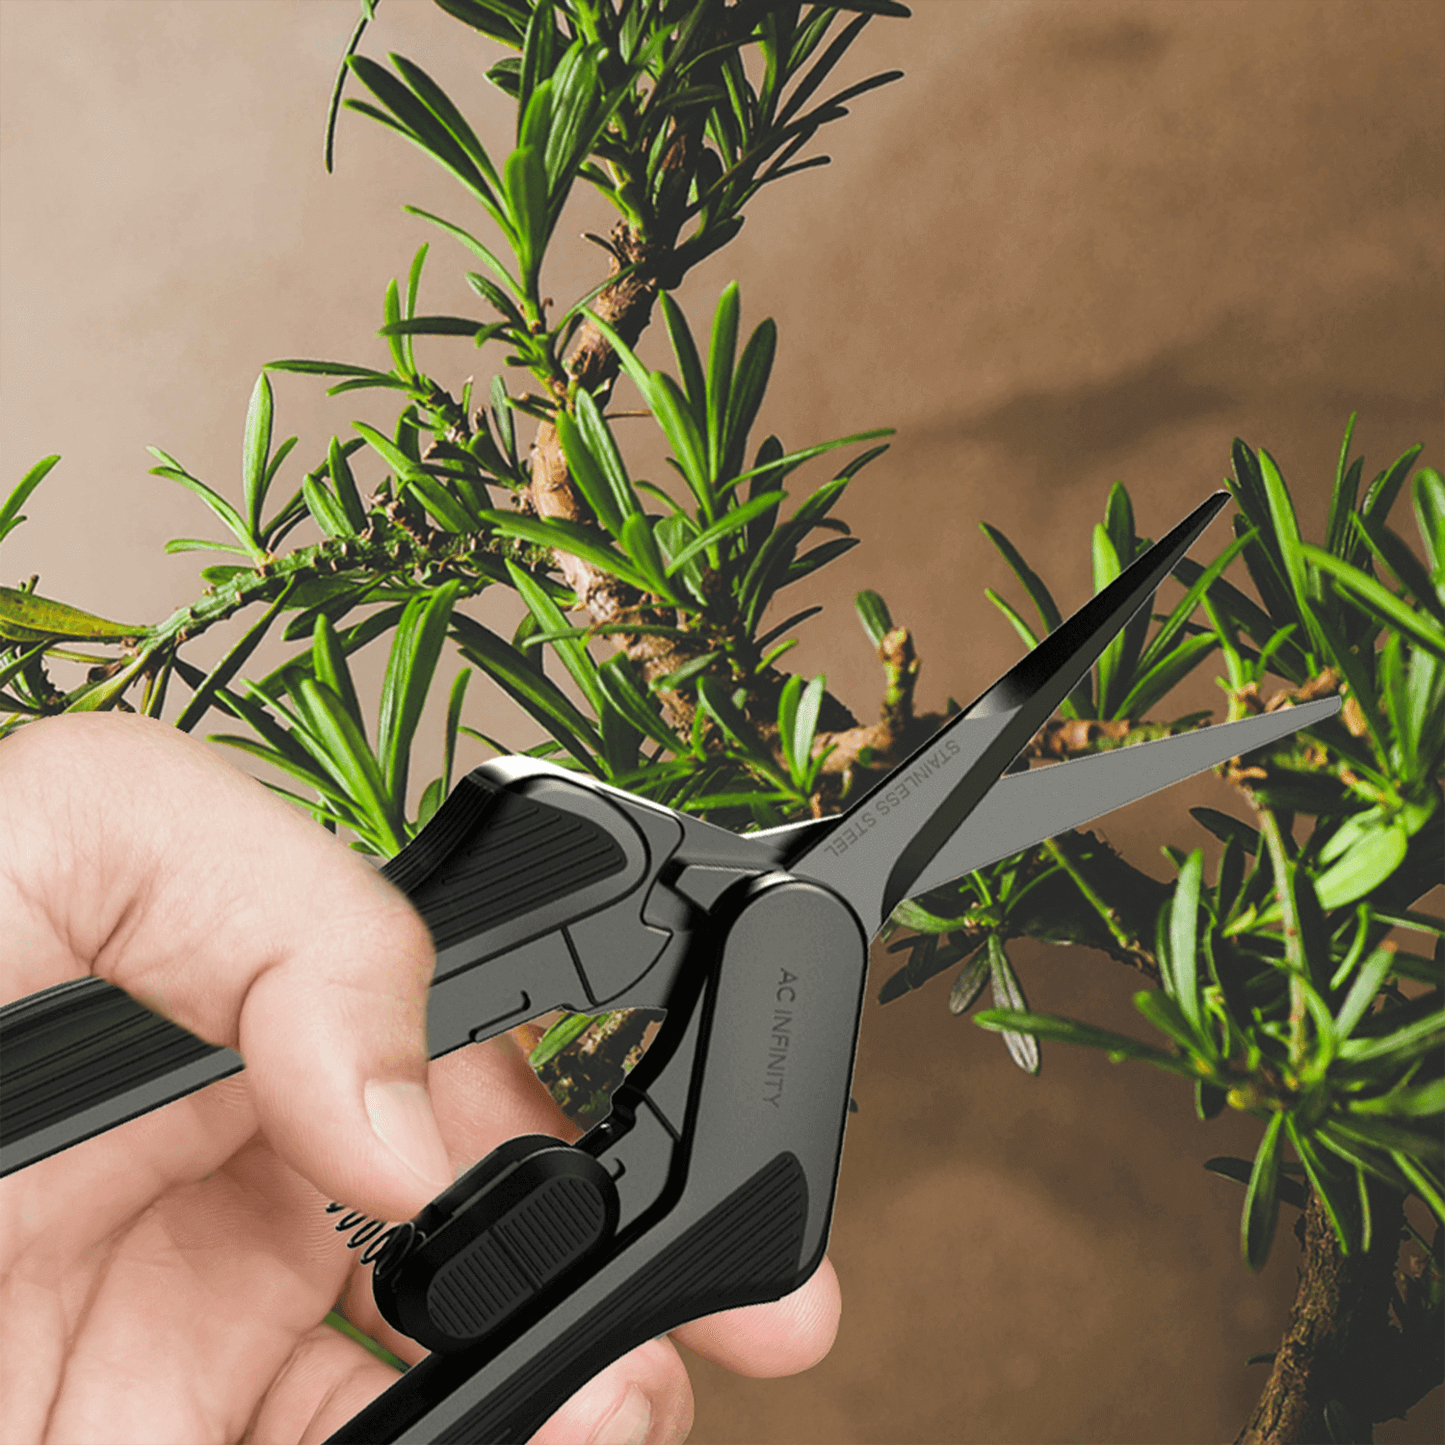 AC Infinity Stainless Steel Pruning Shear, Ergonomic Lightweight, 6.6" Straight Blades, 2-Pack | AC-PSA3X2 | Grow Tents Depot | Harvest & Extraction | 819137023376